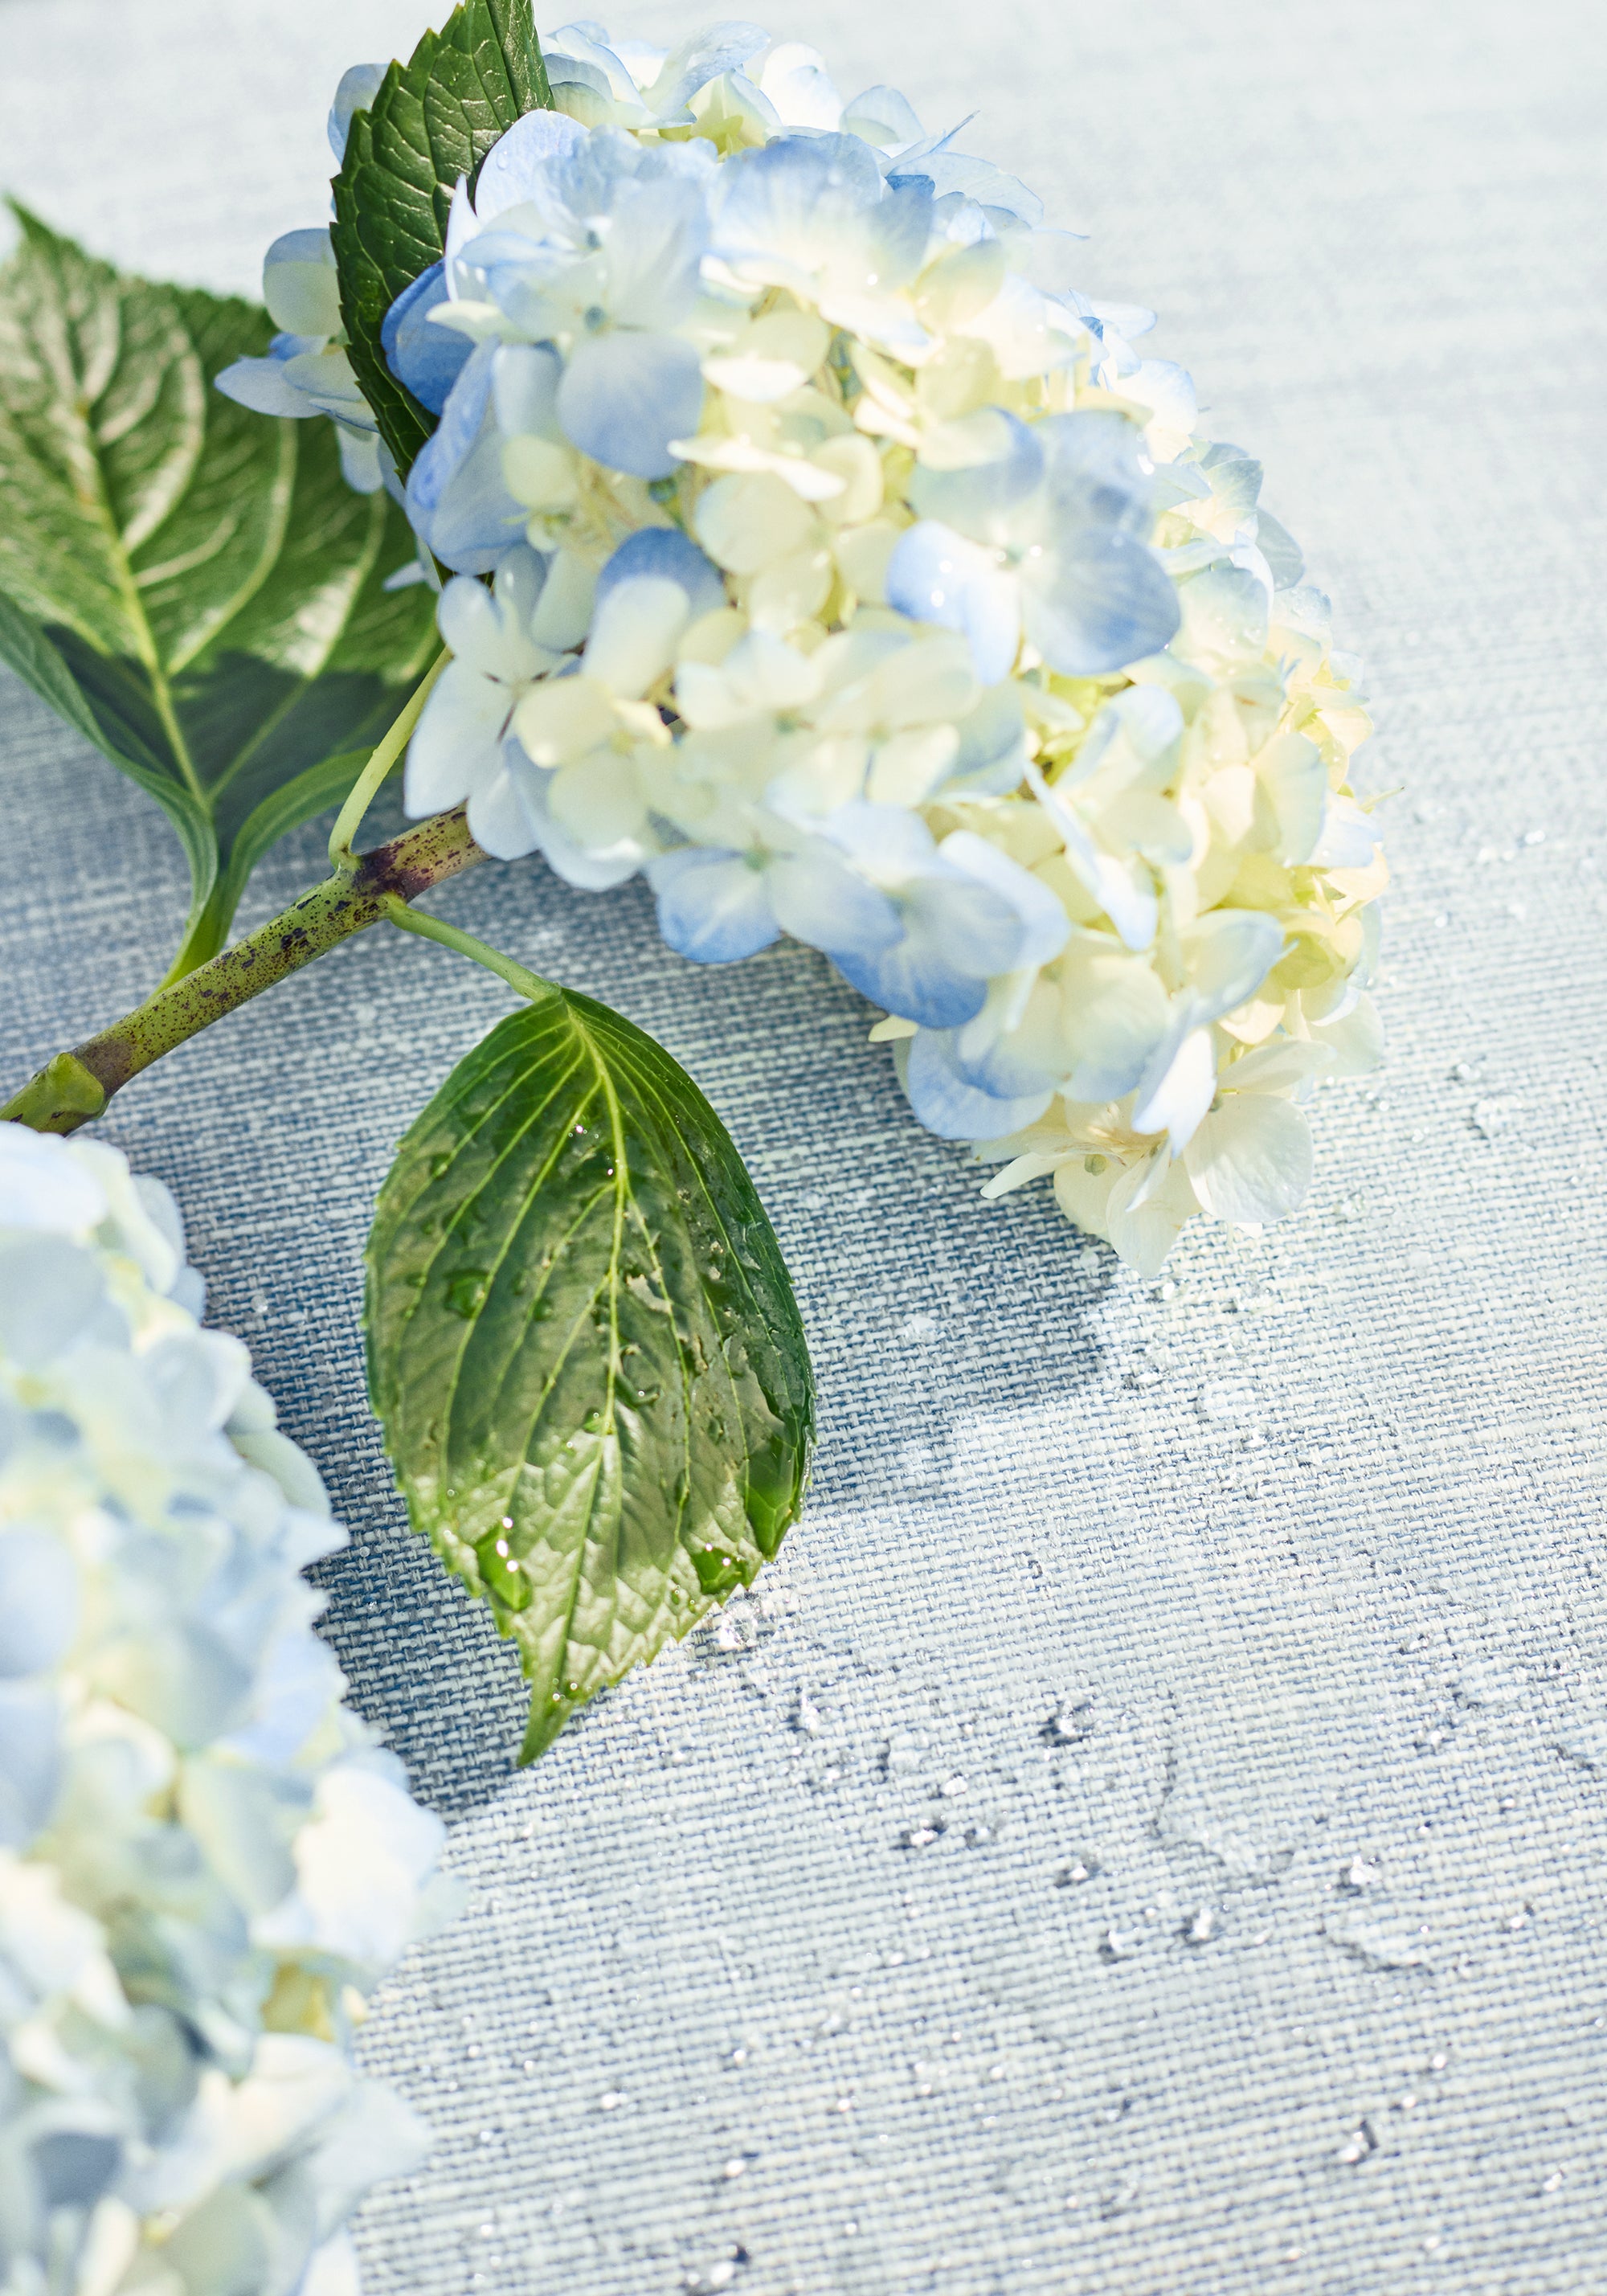 Stain resistant finley fabric in chambray color - pattern number W81605 - by Thibaut fabrics